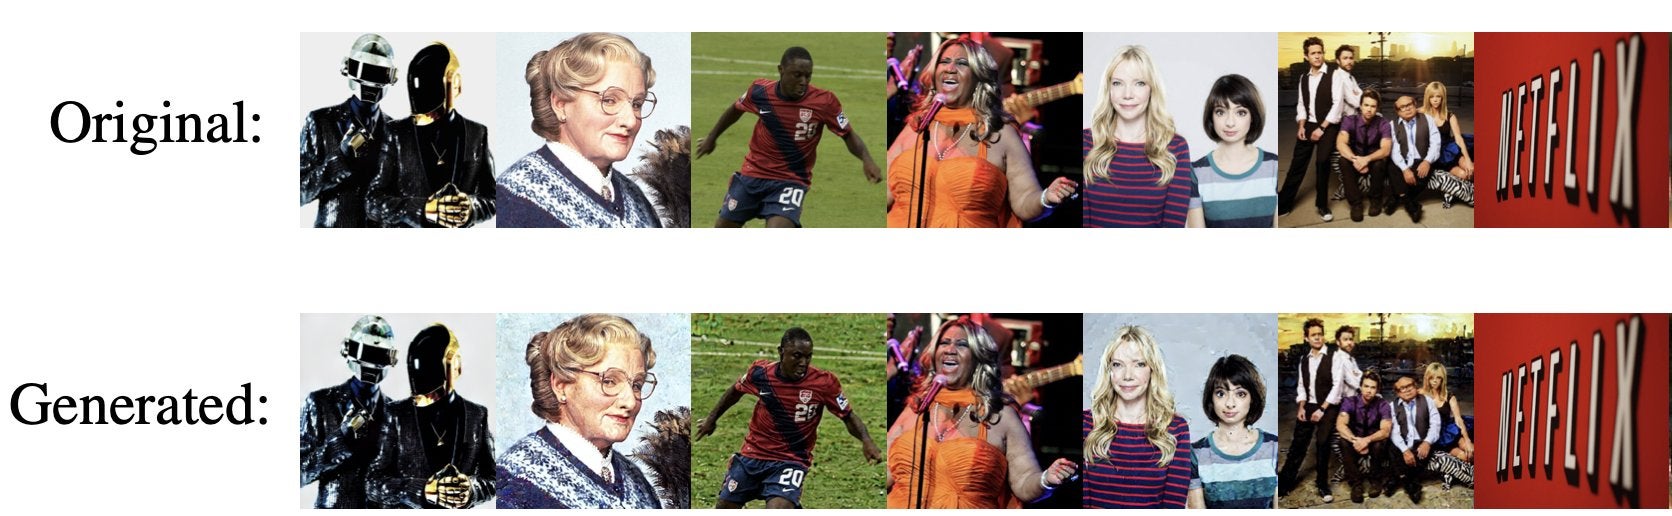 The bottom images were traced to the top images that were taken directly from AI's training data. All these images could have licence or copyright tied to them. (Image: Cornell University/Extracting Training Data from Diffusion Models)